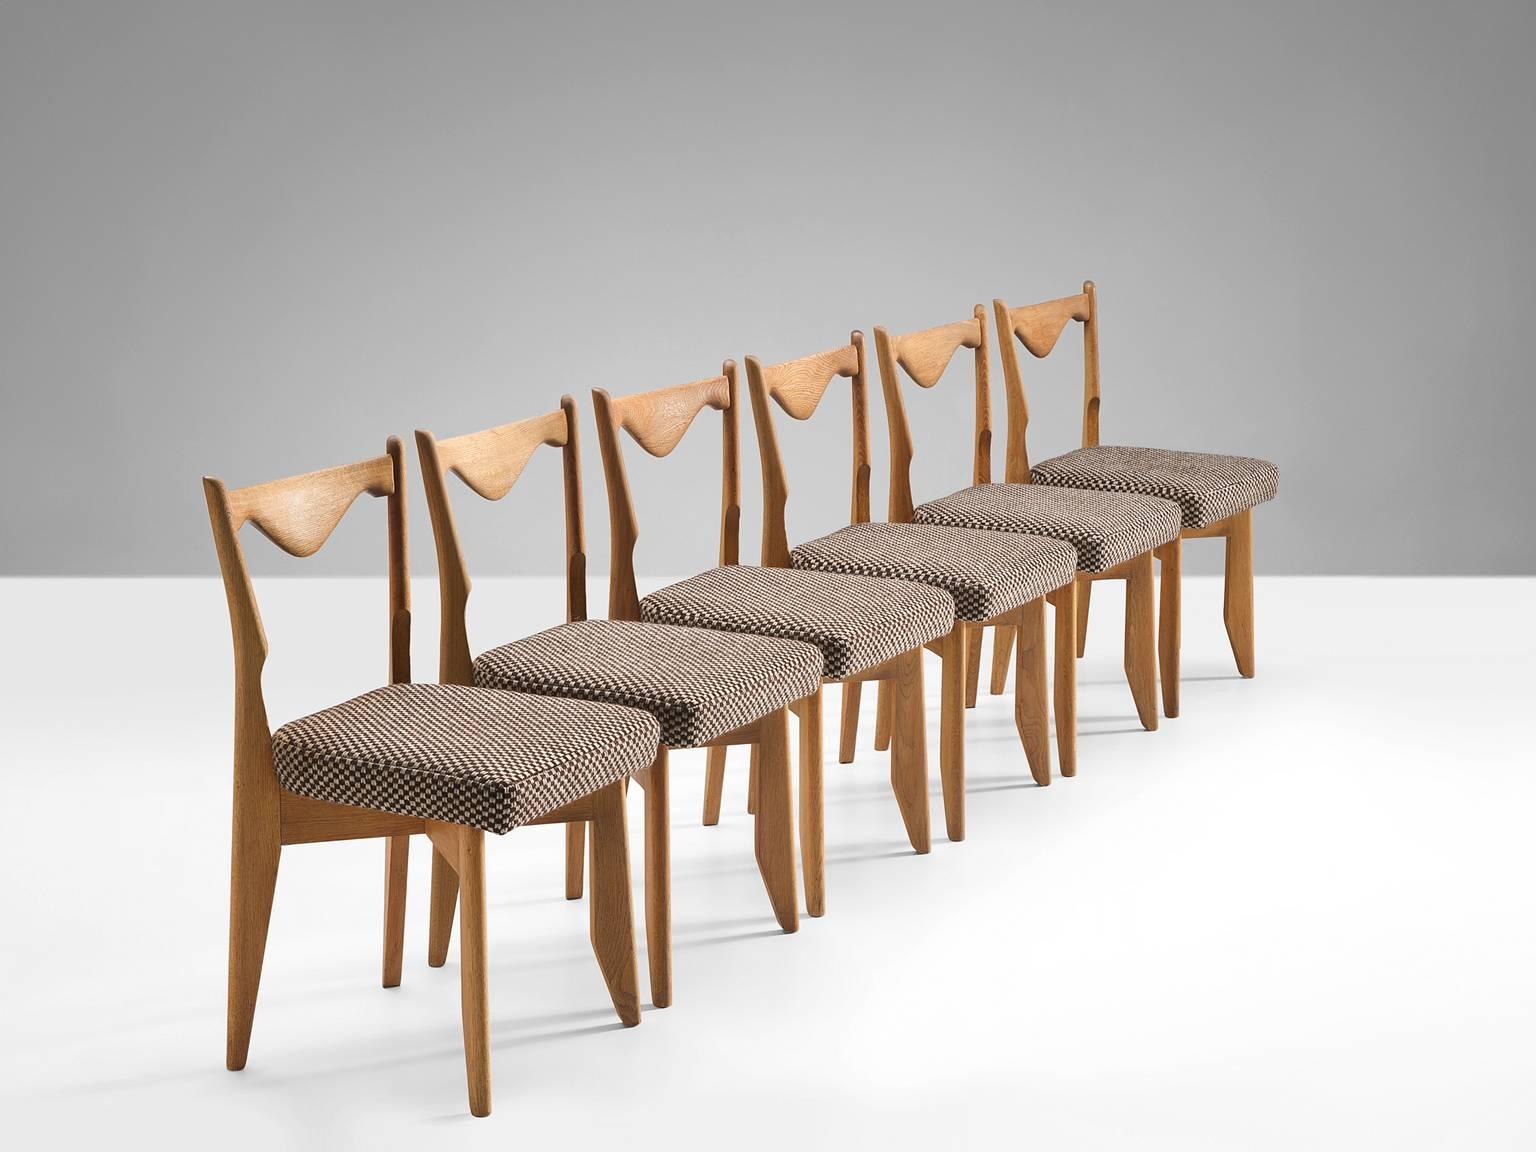 Set of six dining chairs, in oak and papercord, by Guillerme & Chambron, France, 1960s.

Set of six elegant dining chairs in solid oak by Guillerme and Chambron. These chairs show the characteristic frame of this French designer duo. Tapered legs